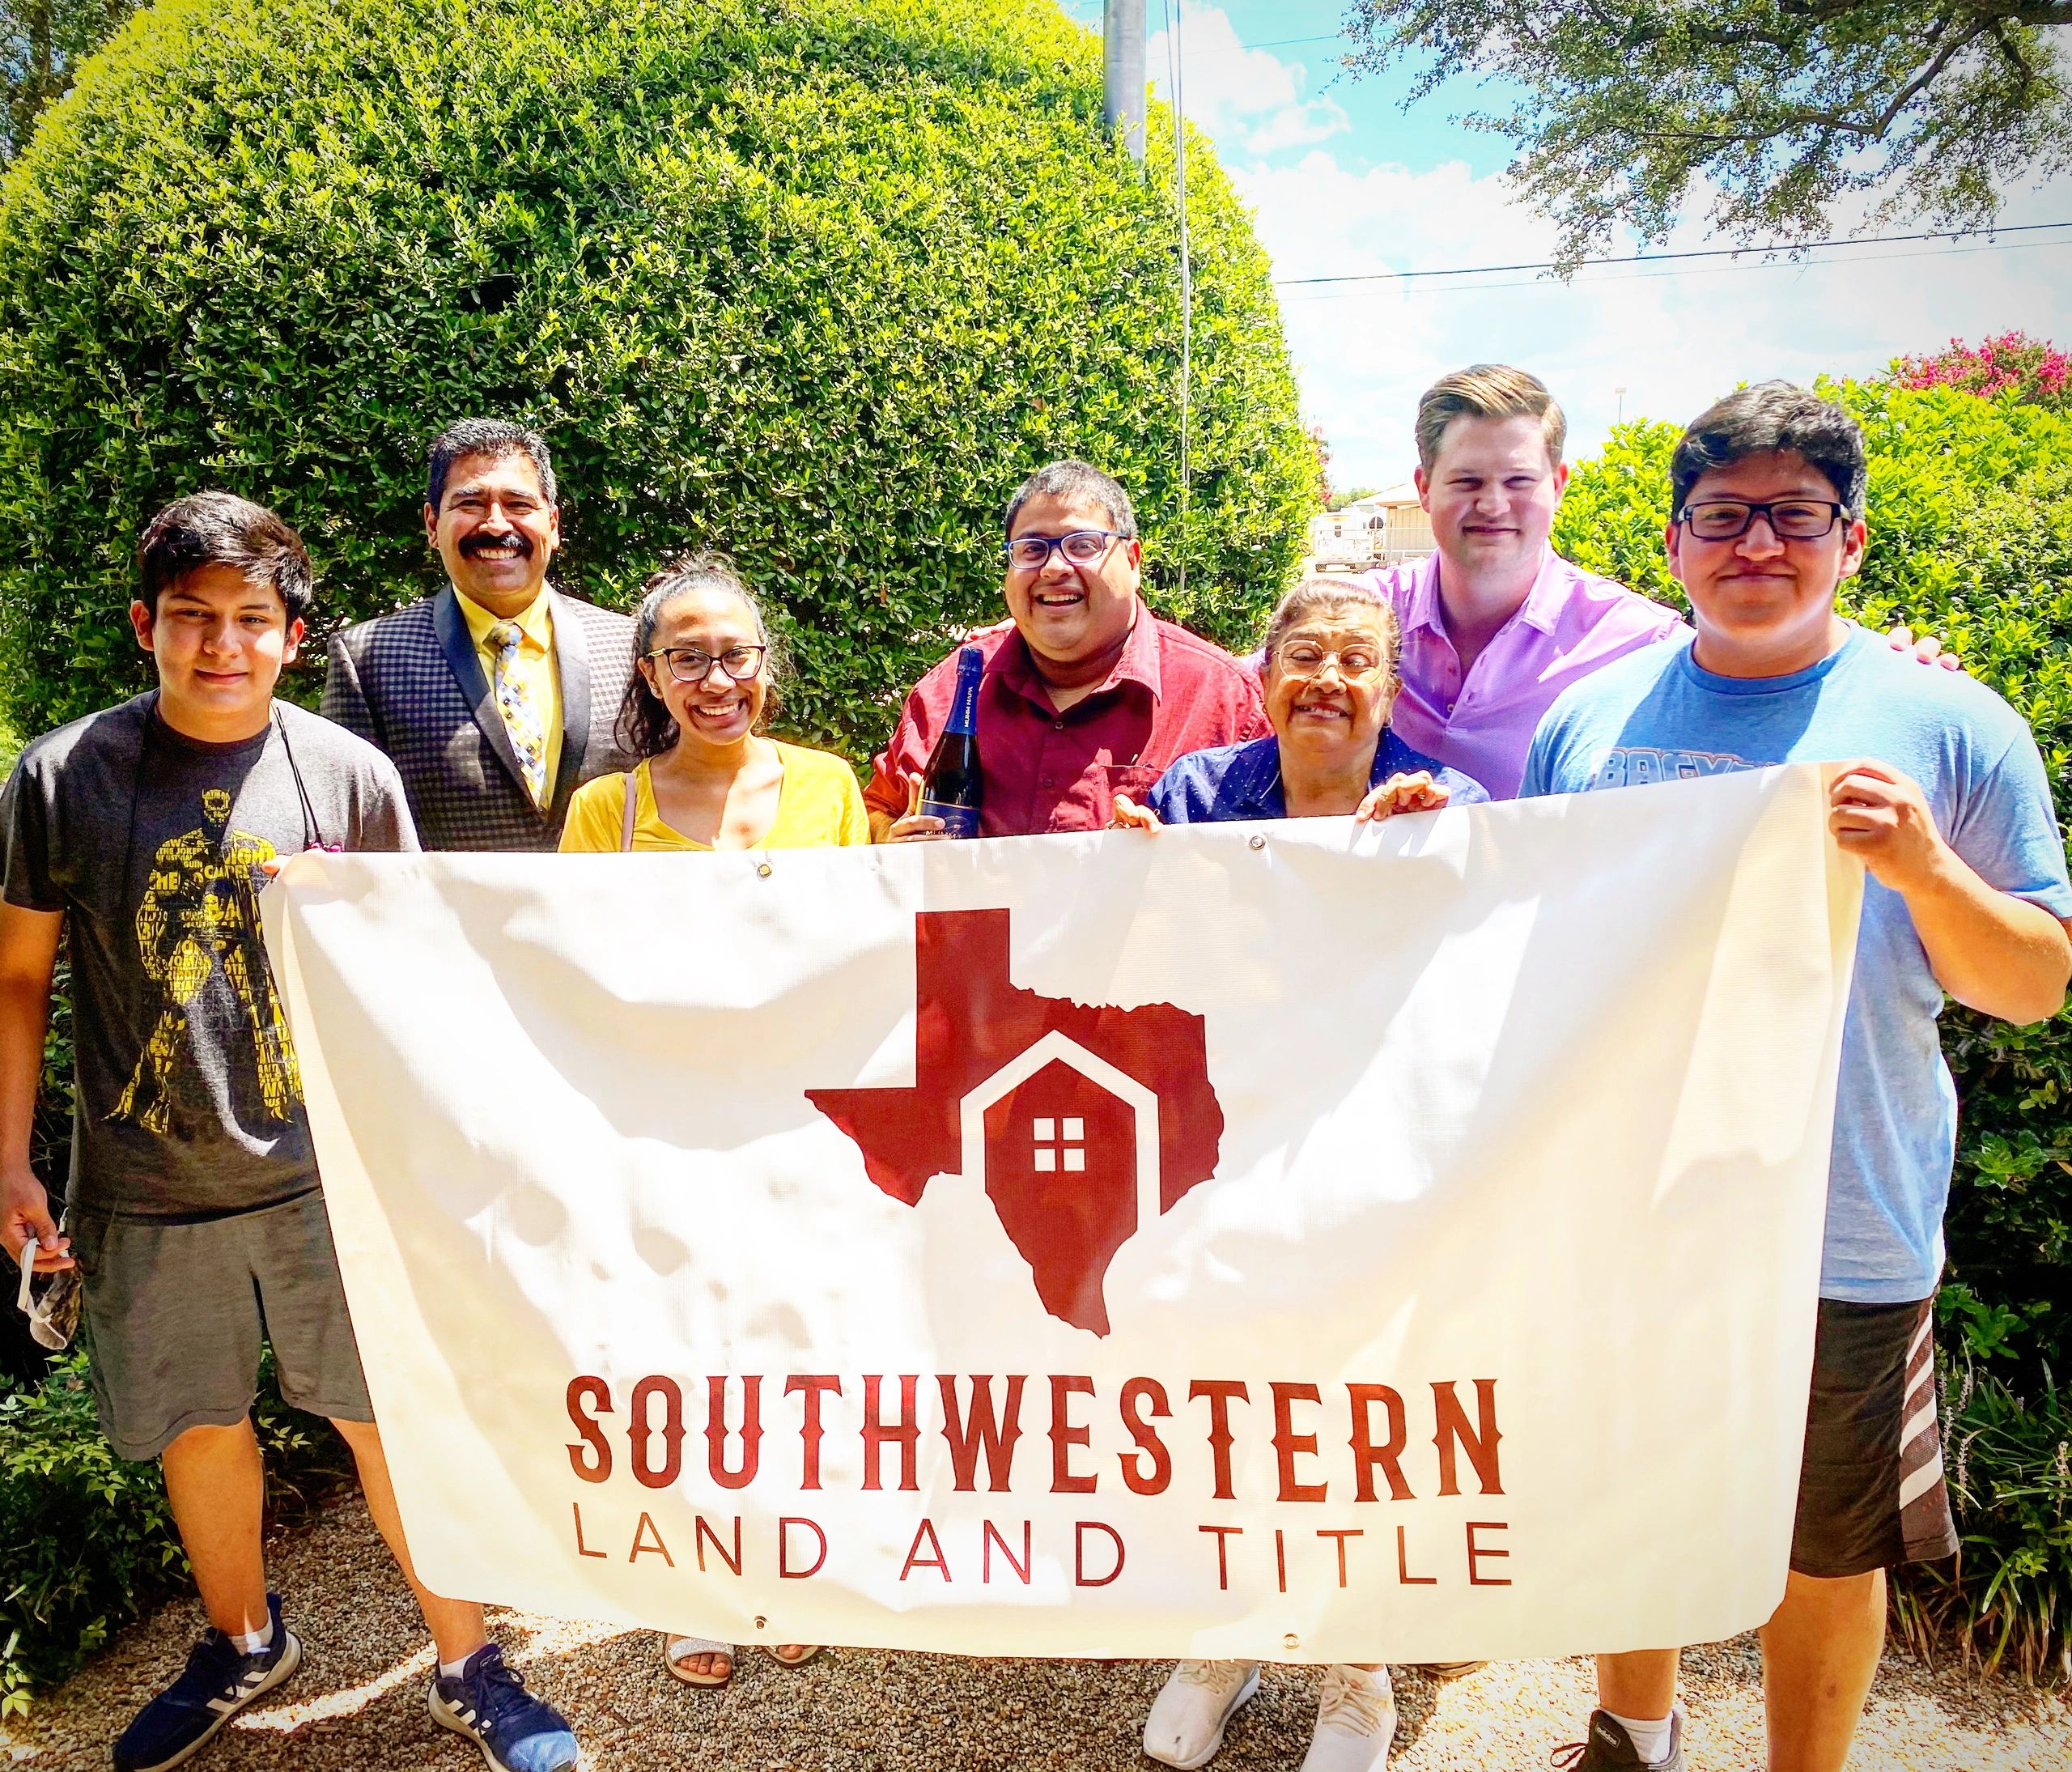 Southwestern Land and Title offers title insurance and mobile loan closings in Texas